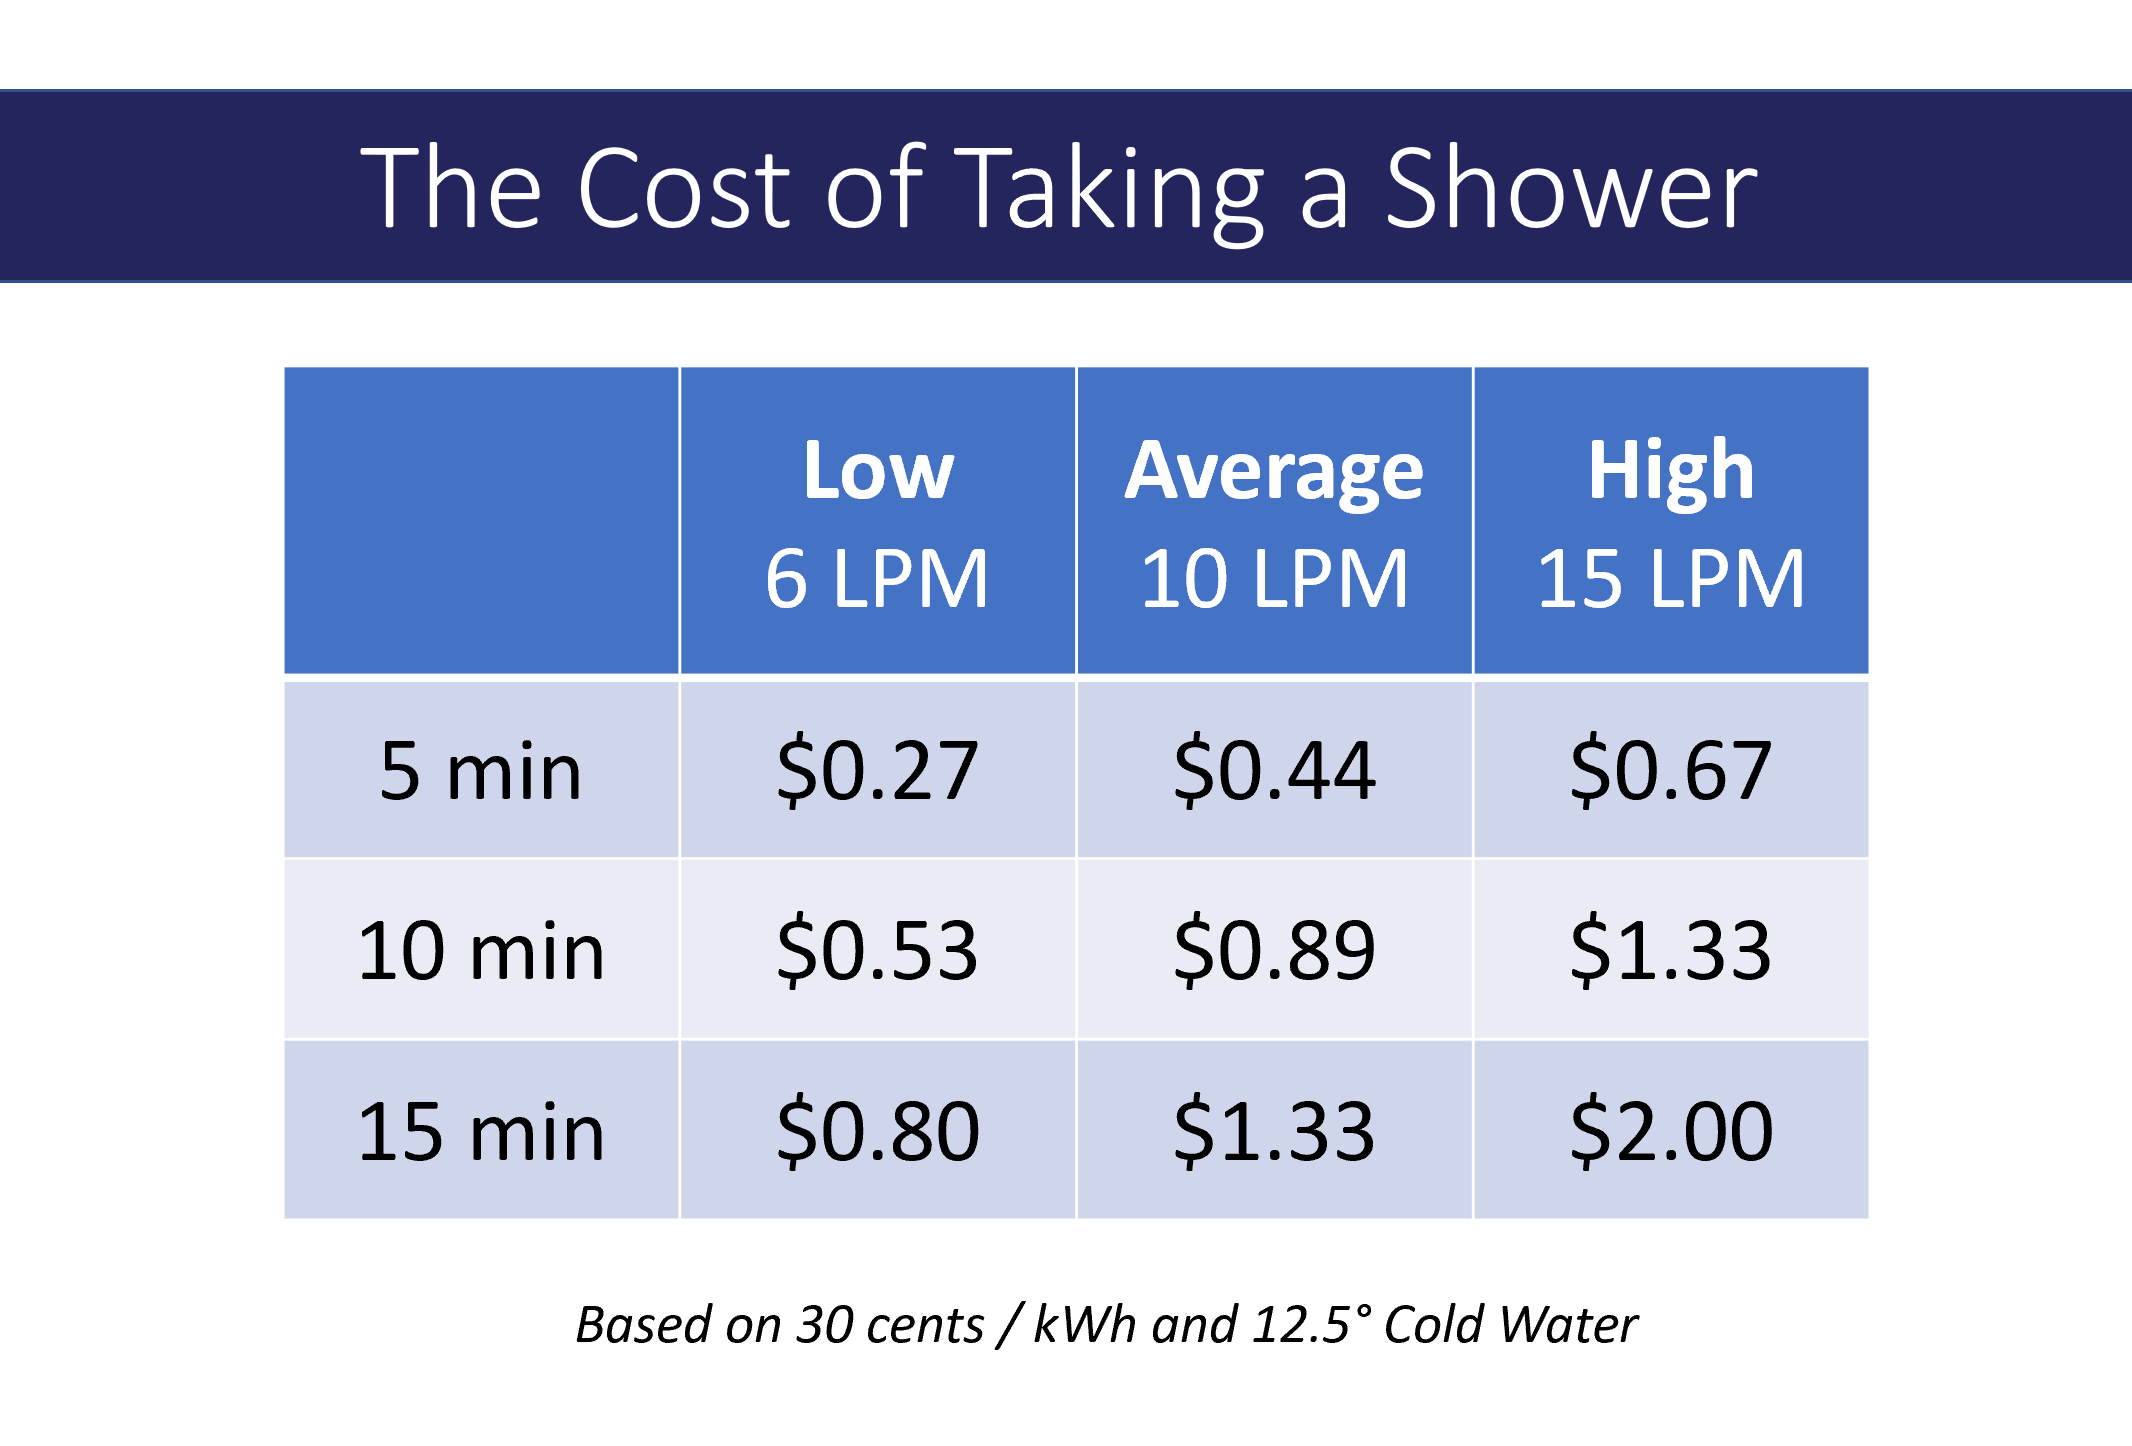 Cost of showering in New Zealand per shower